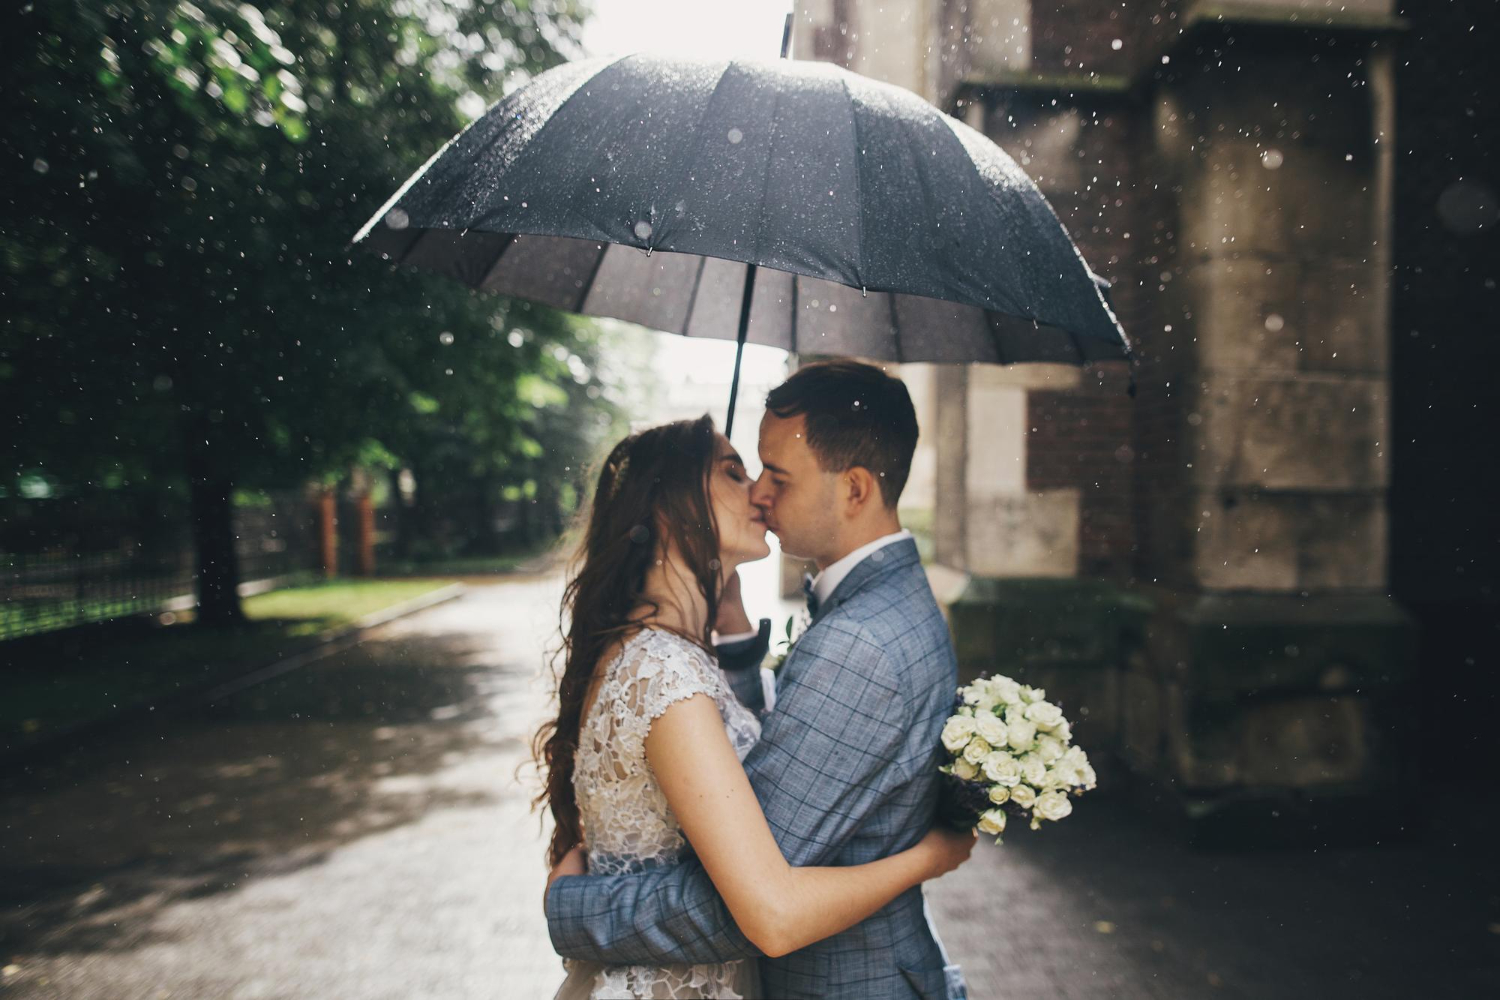 stylish bride and groom kissing under umbrella on background of old church in rain